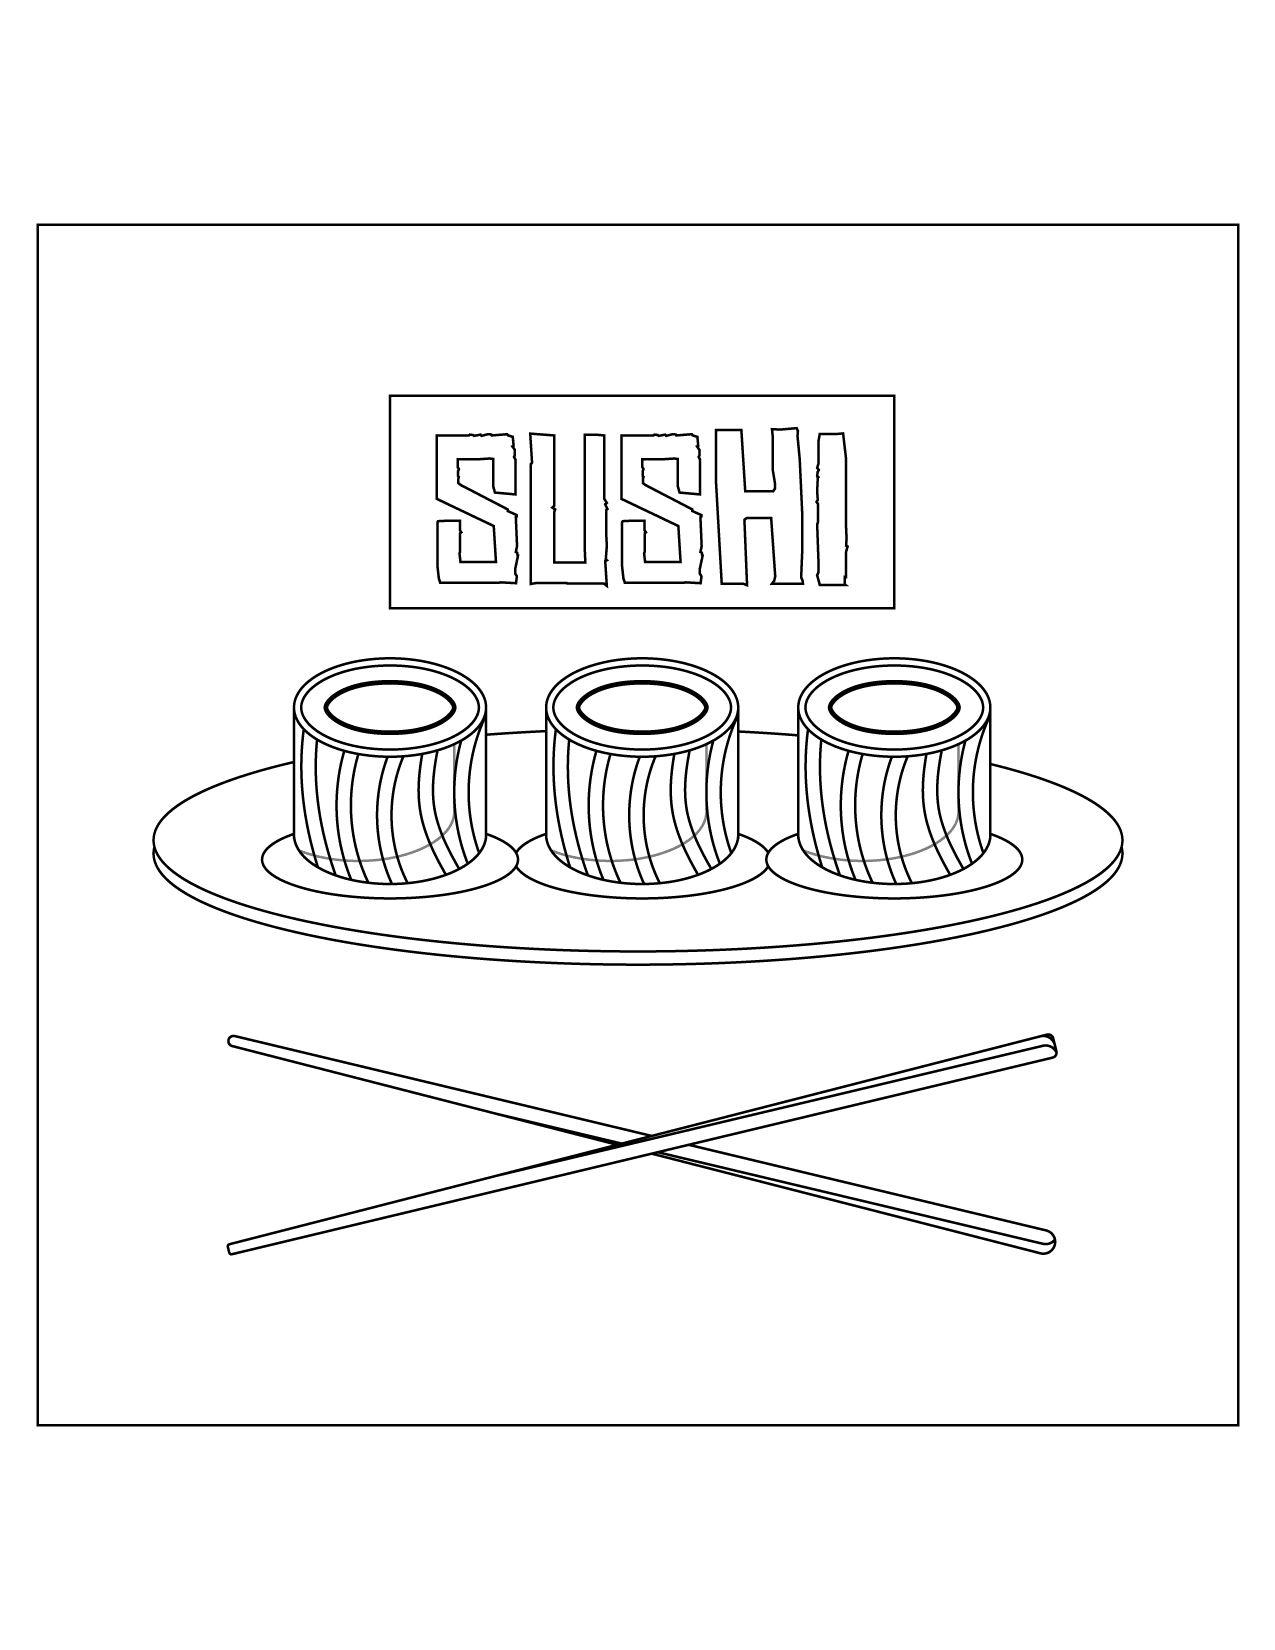 Plate Of Sushi Wth Chopsticks Coloring Page